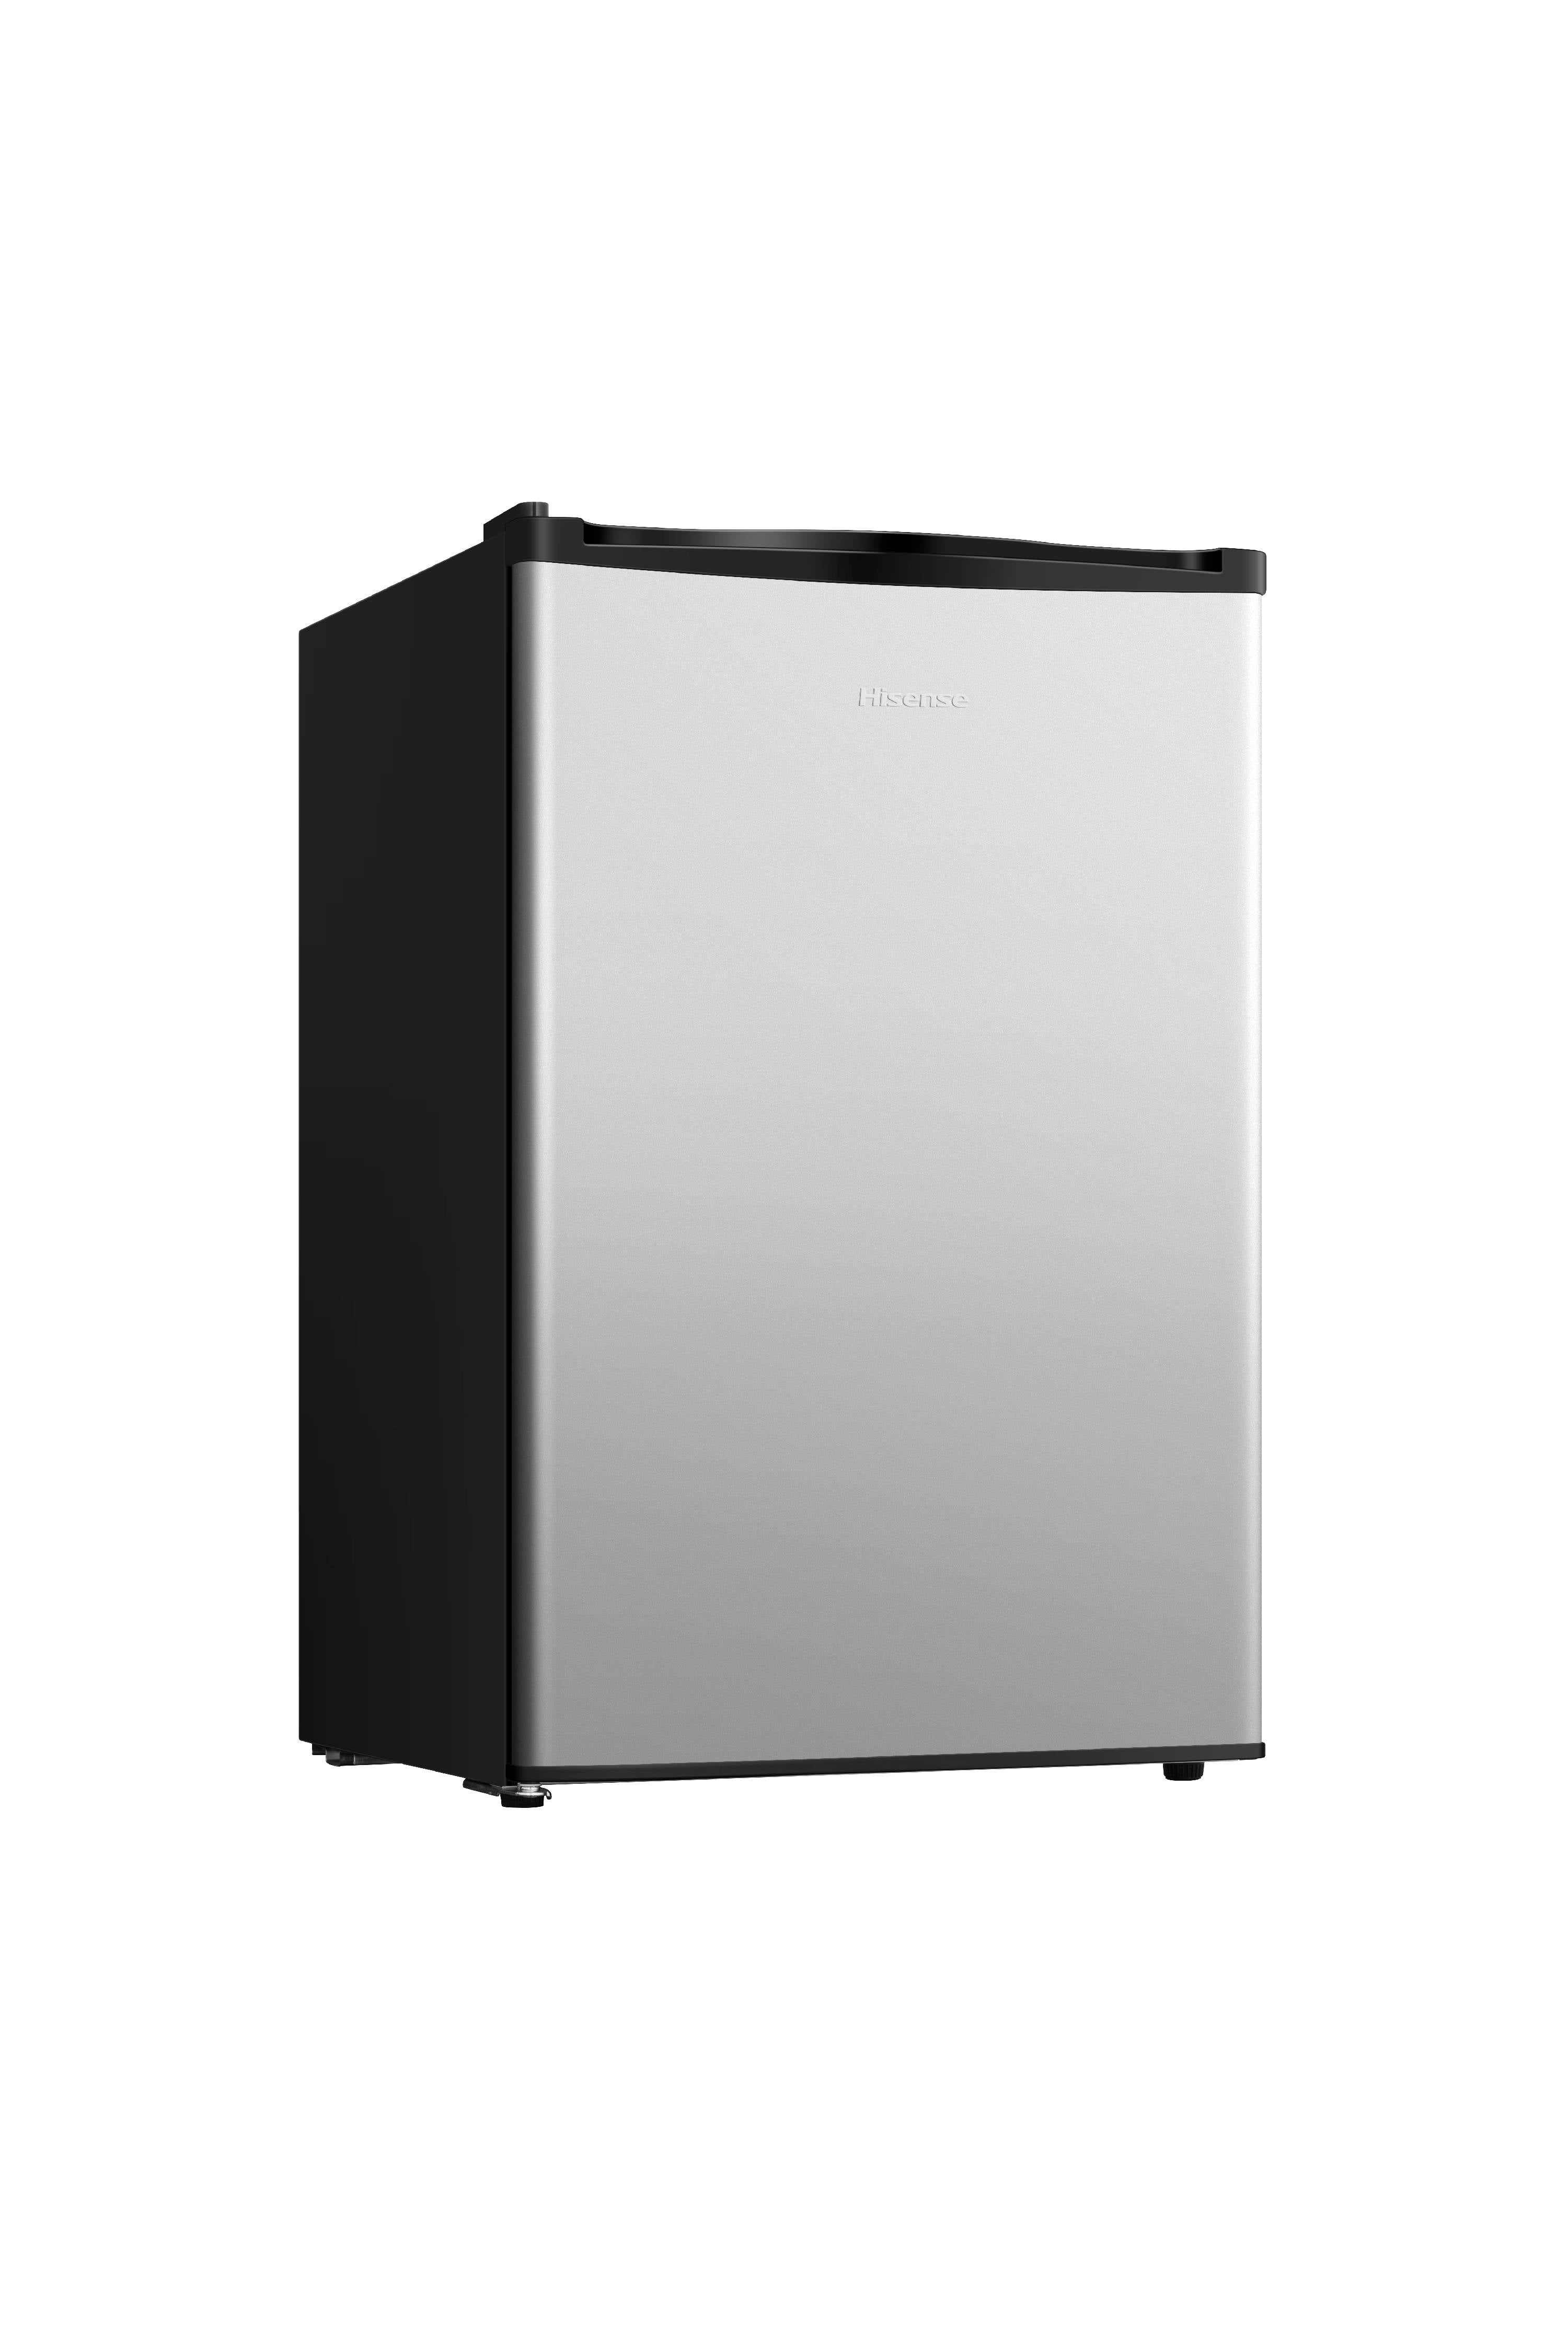 REFURBISHED 4.4 Cubic Foot Compact Refrigerator in Stainless Steel Hisense 